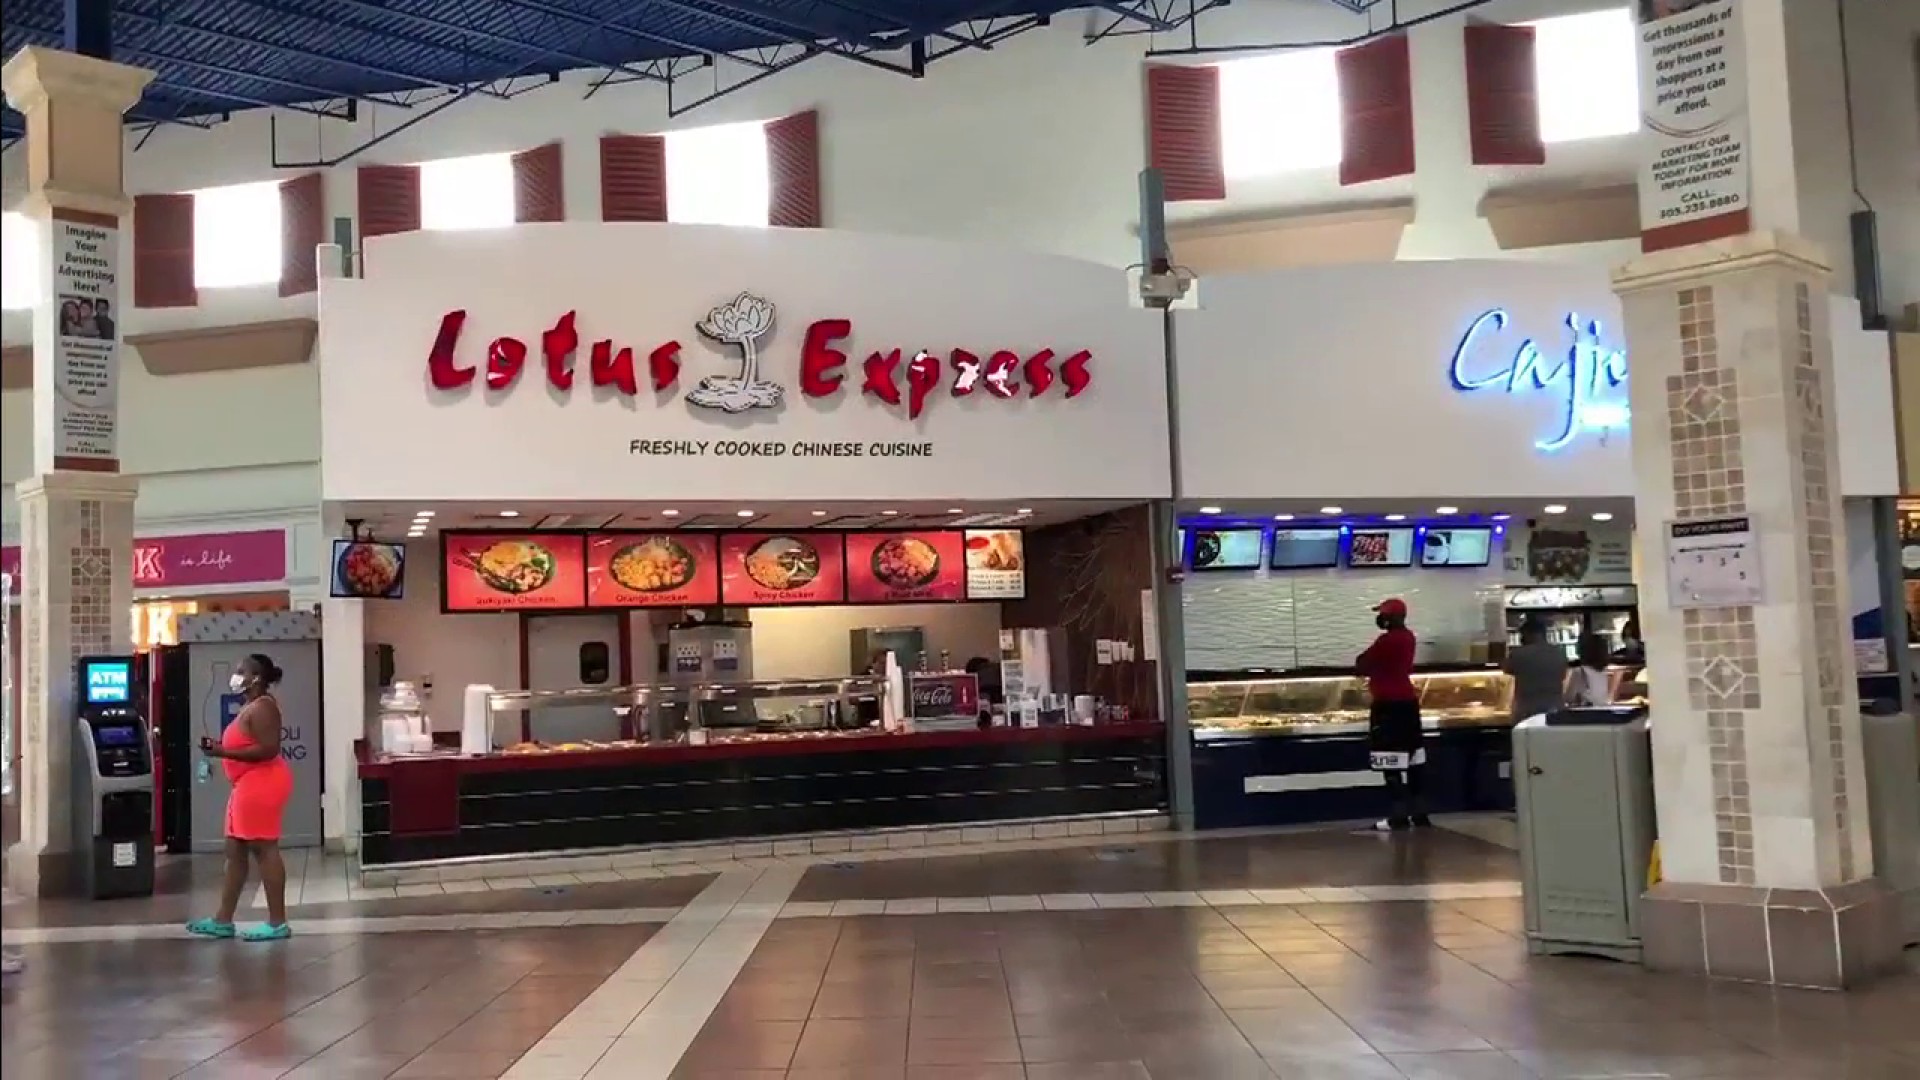 Restaurants in Southland Mall and Sawgrass Mills ordered shut